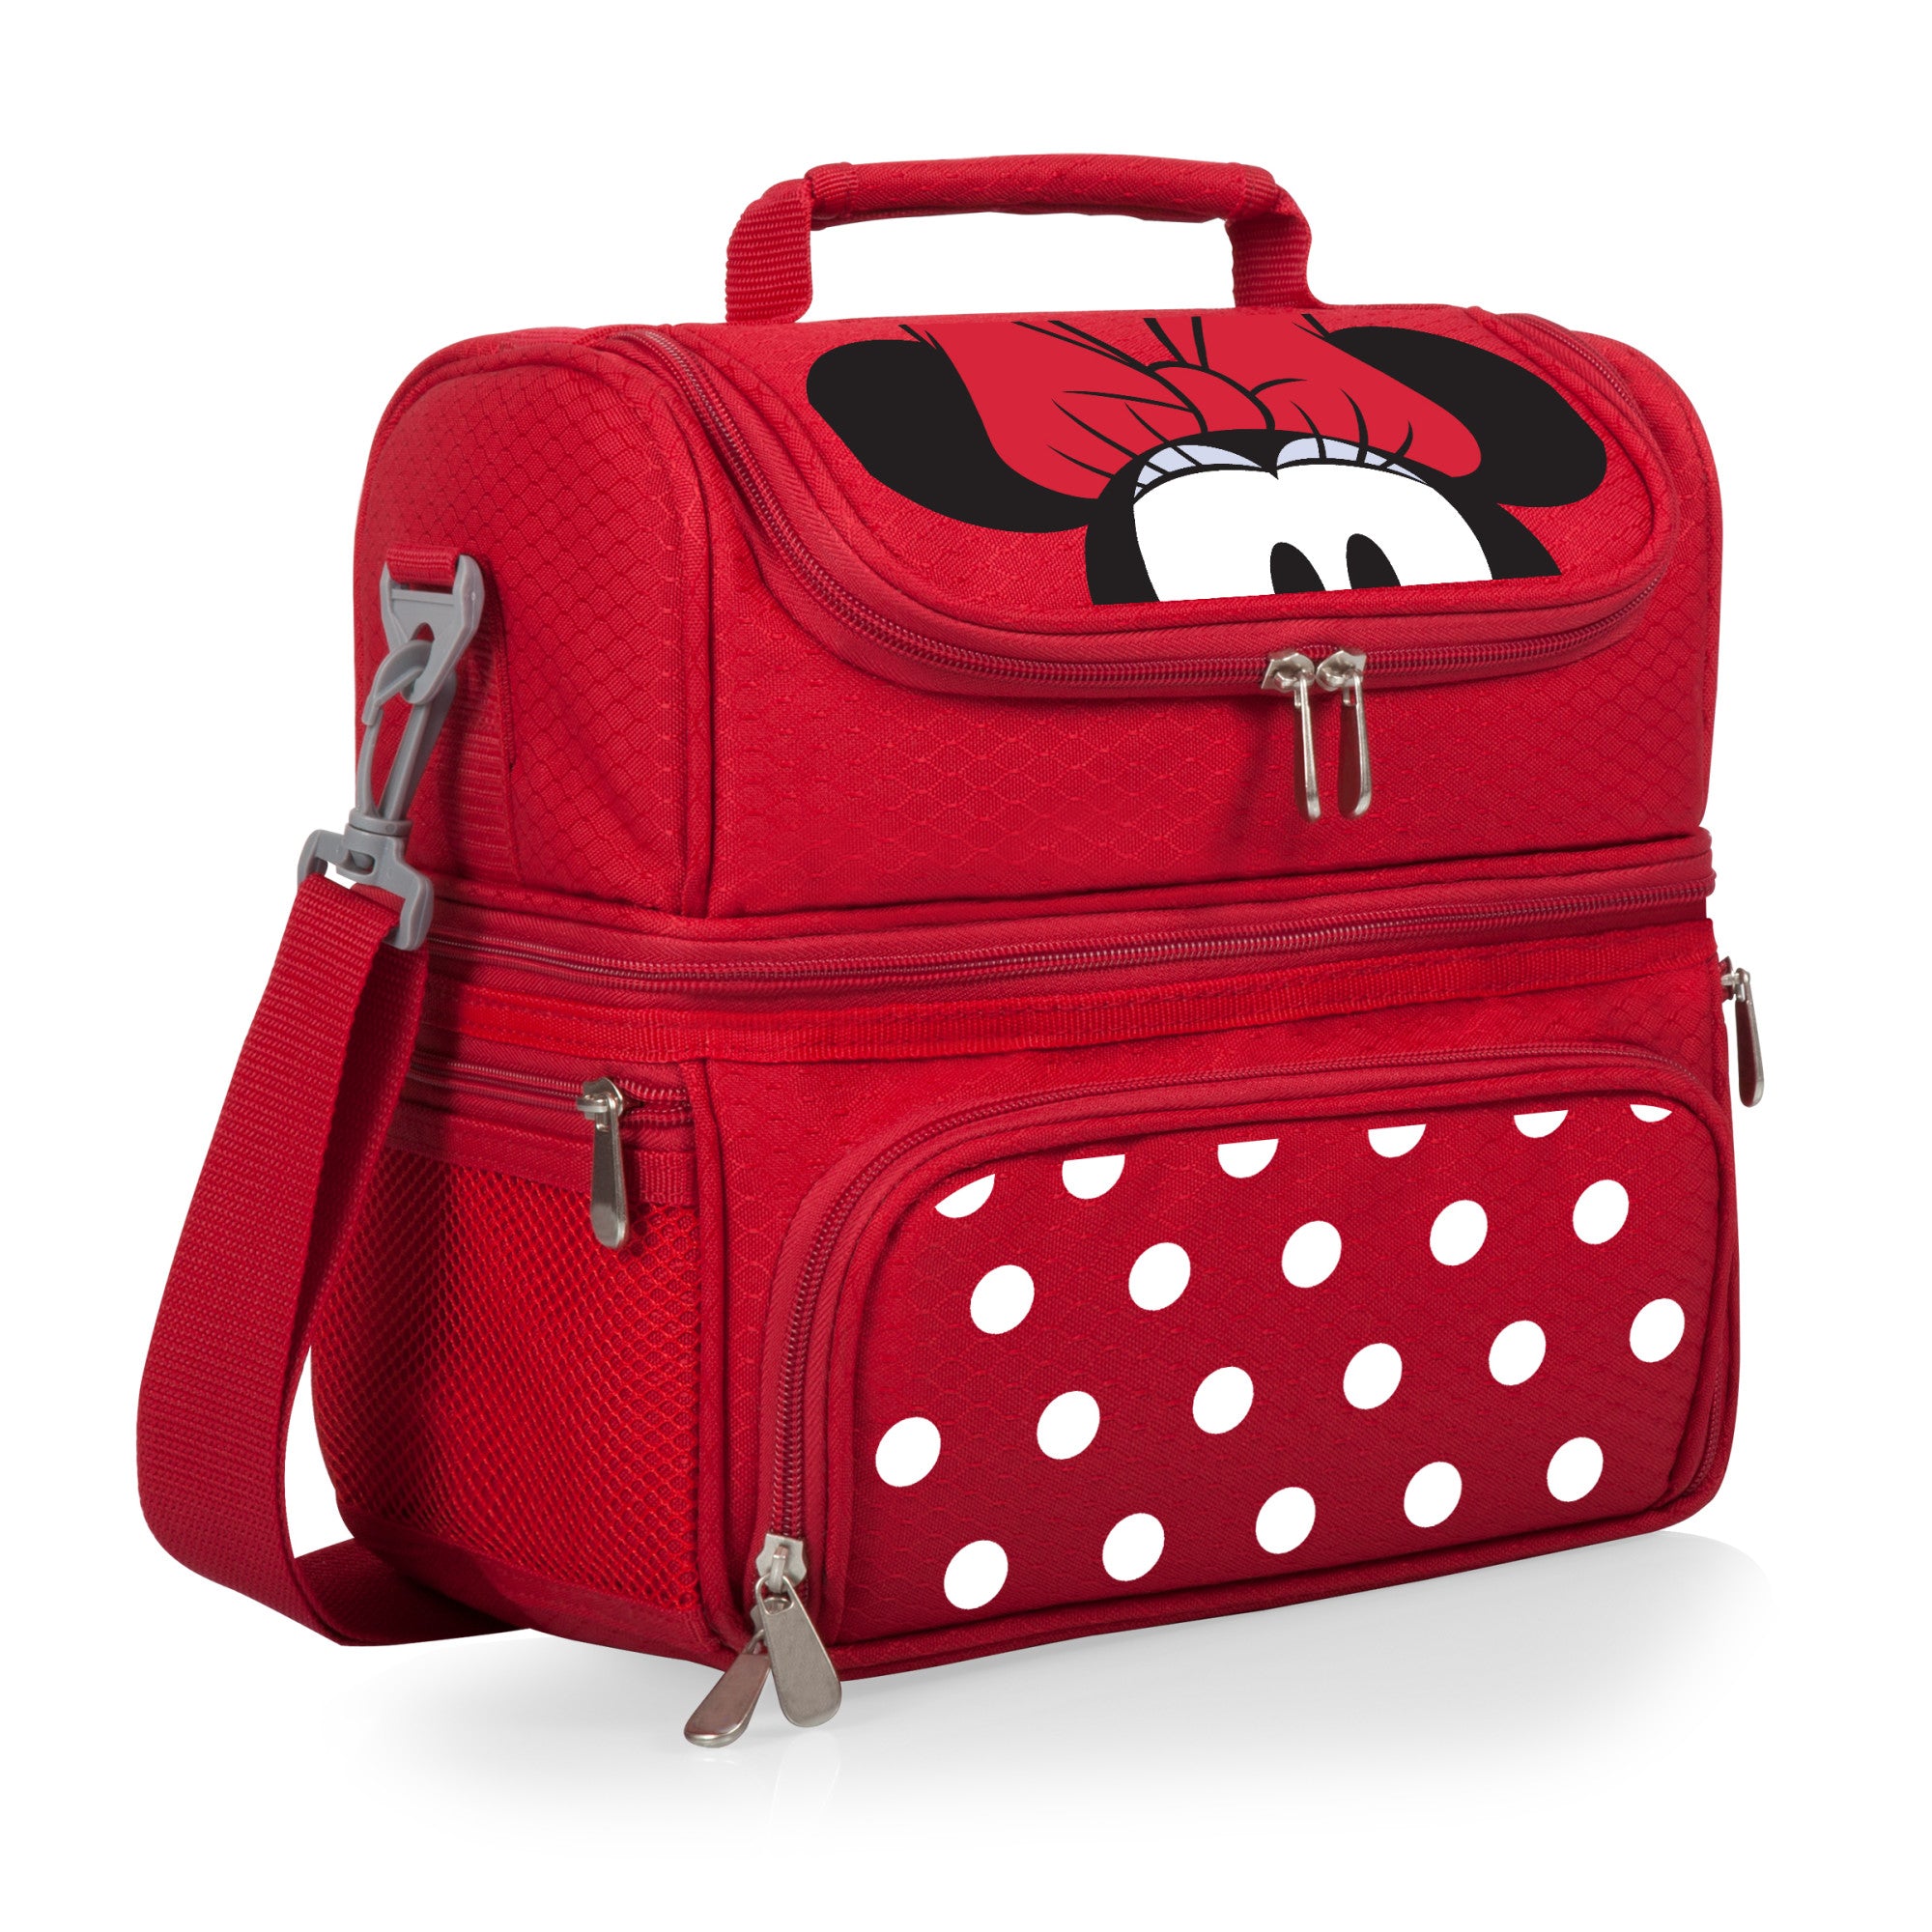 Minnie Mouse - Pranzo Lunch Bag Cooler with Utensils